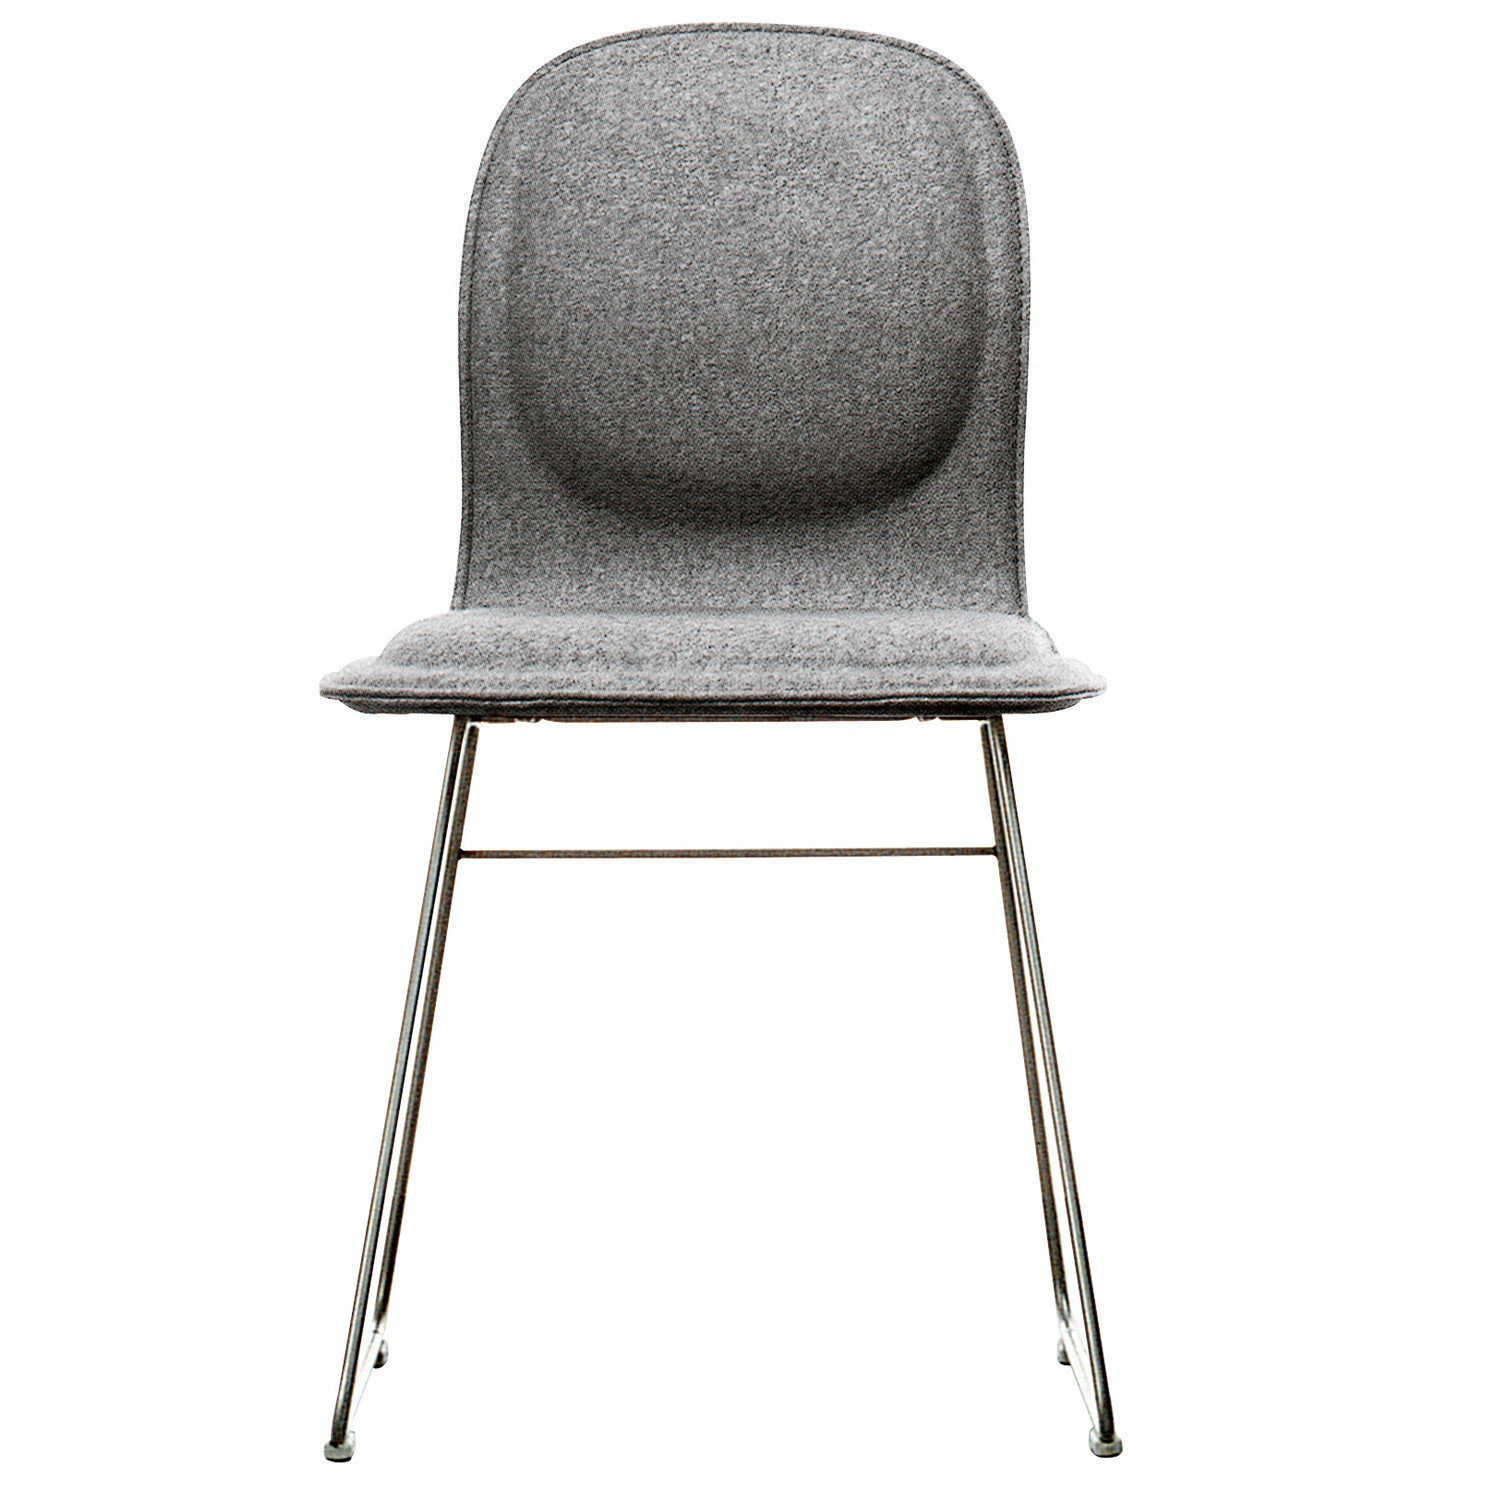 Hi Pad Chair  by Cappellini